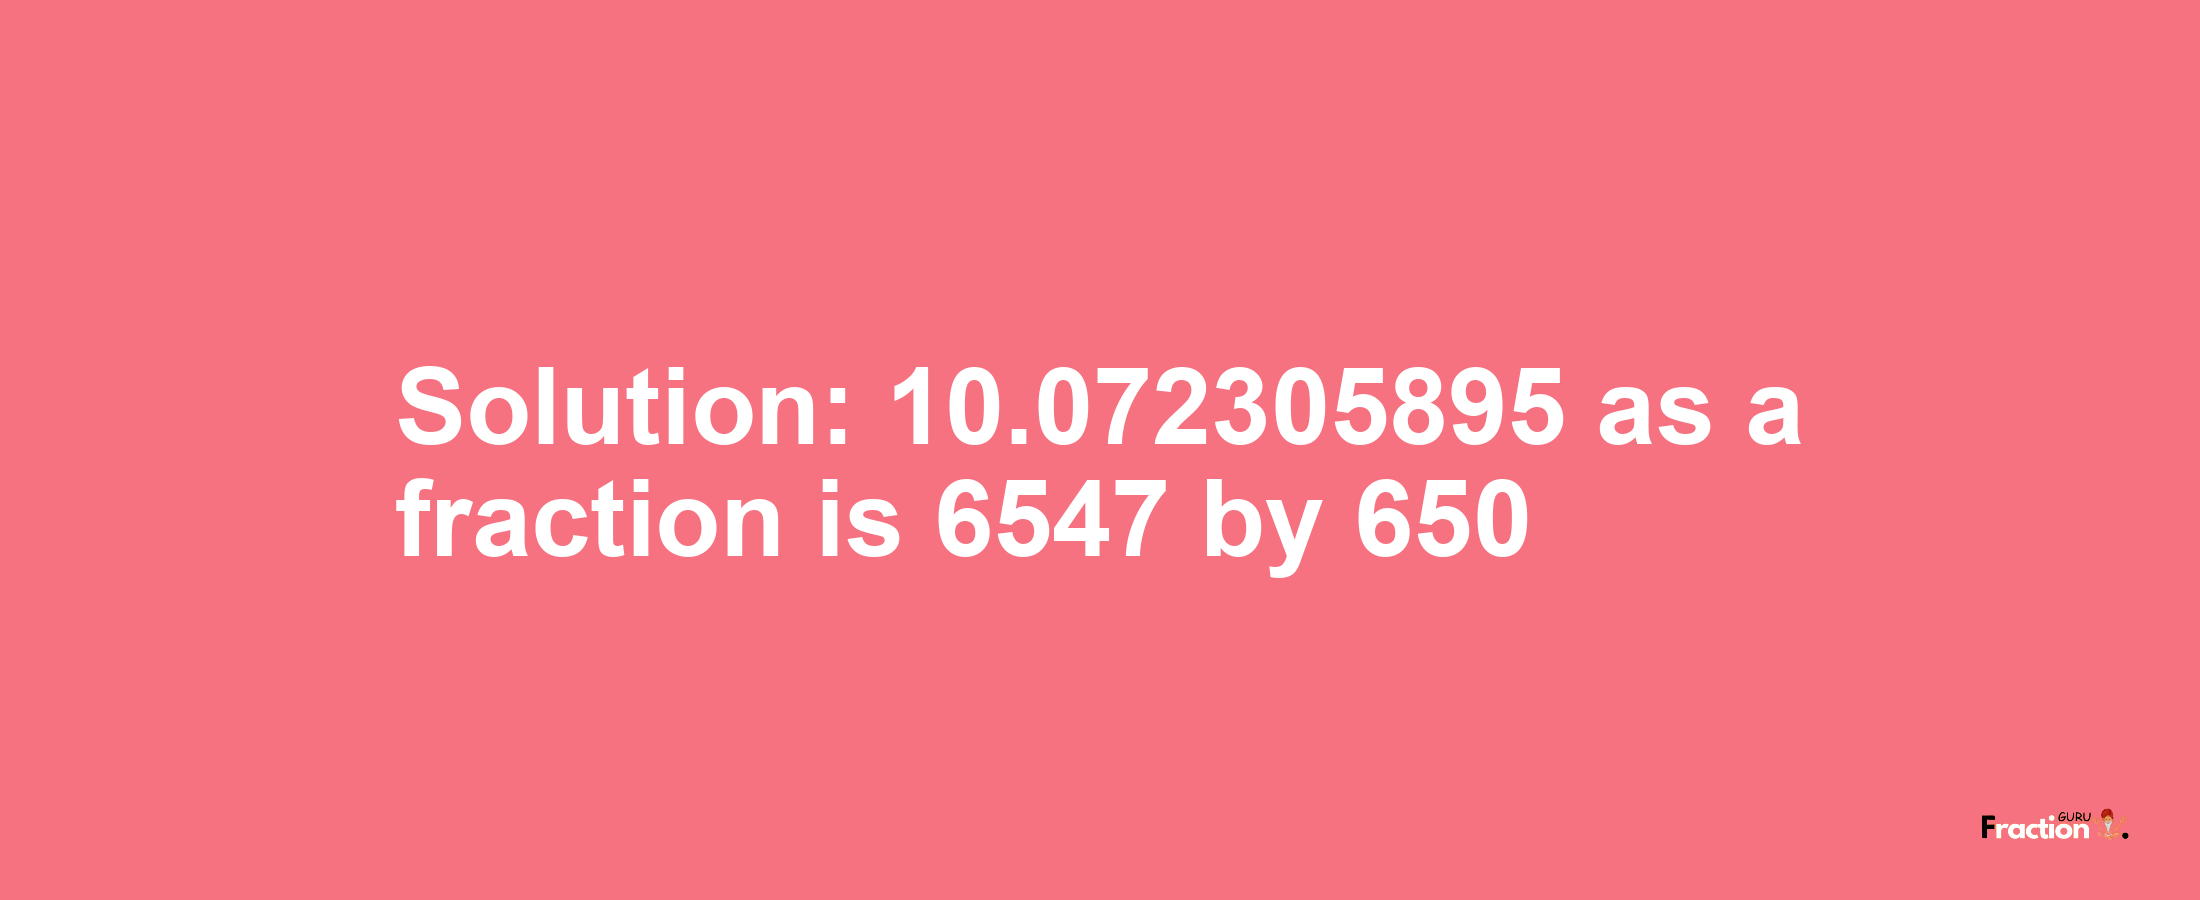 Solution:10.072305895 as a fraction is 6547/650